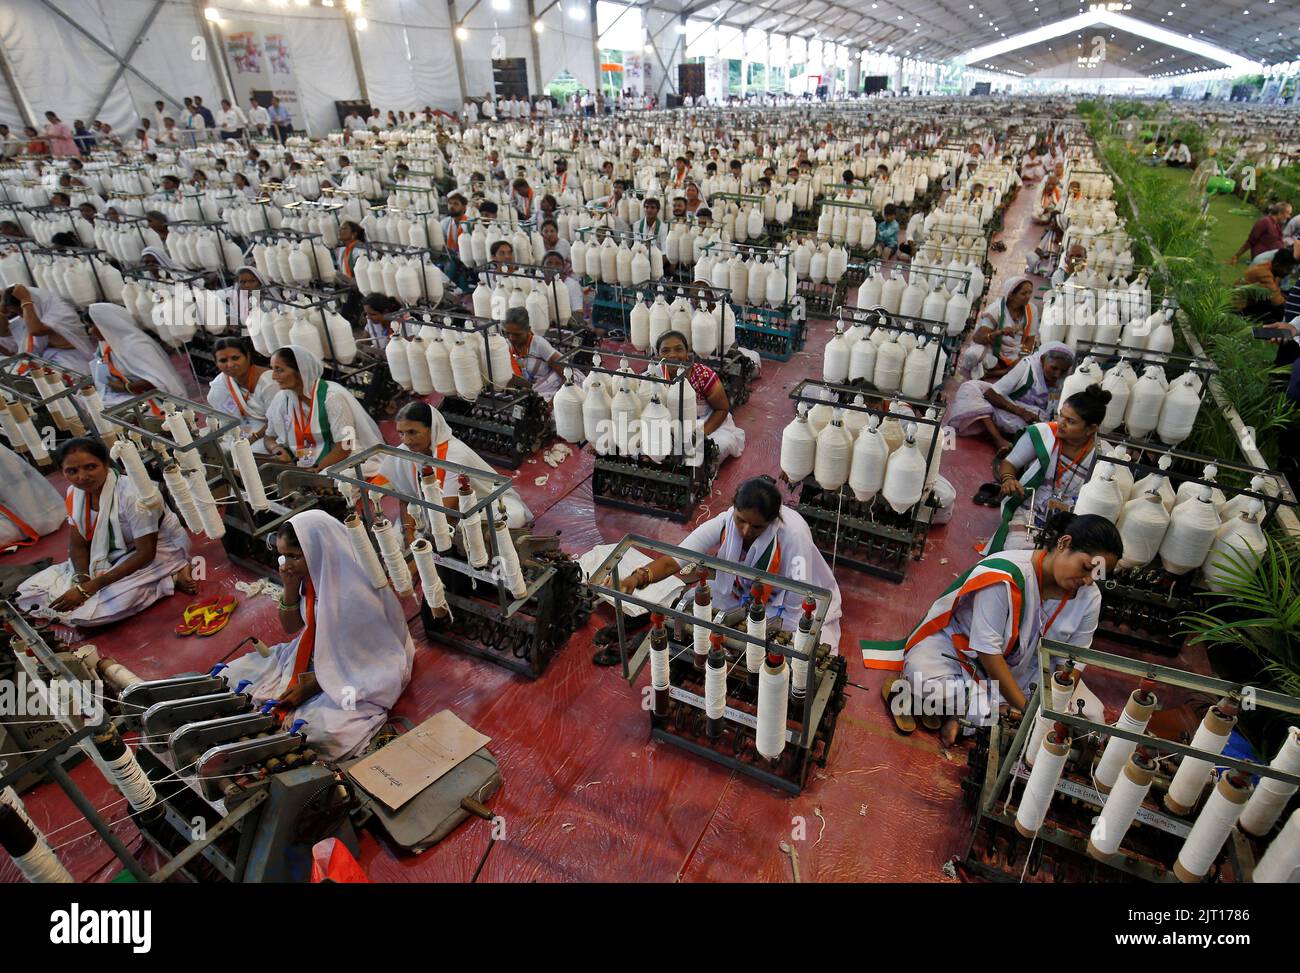 Artisans spin cotton on Amber Charkha, a cotton spinning wheel, during an event where 7500 artisans spin cotton live at same place to promote hand woven cotton cloth as part of the celebrations commemorating 75 years of India's Independence, in Ahmedabad, India, August 27, 2022. REUTERS/Amit Dave Stock Photo